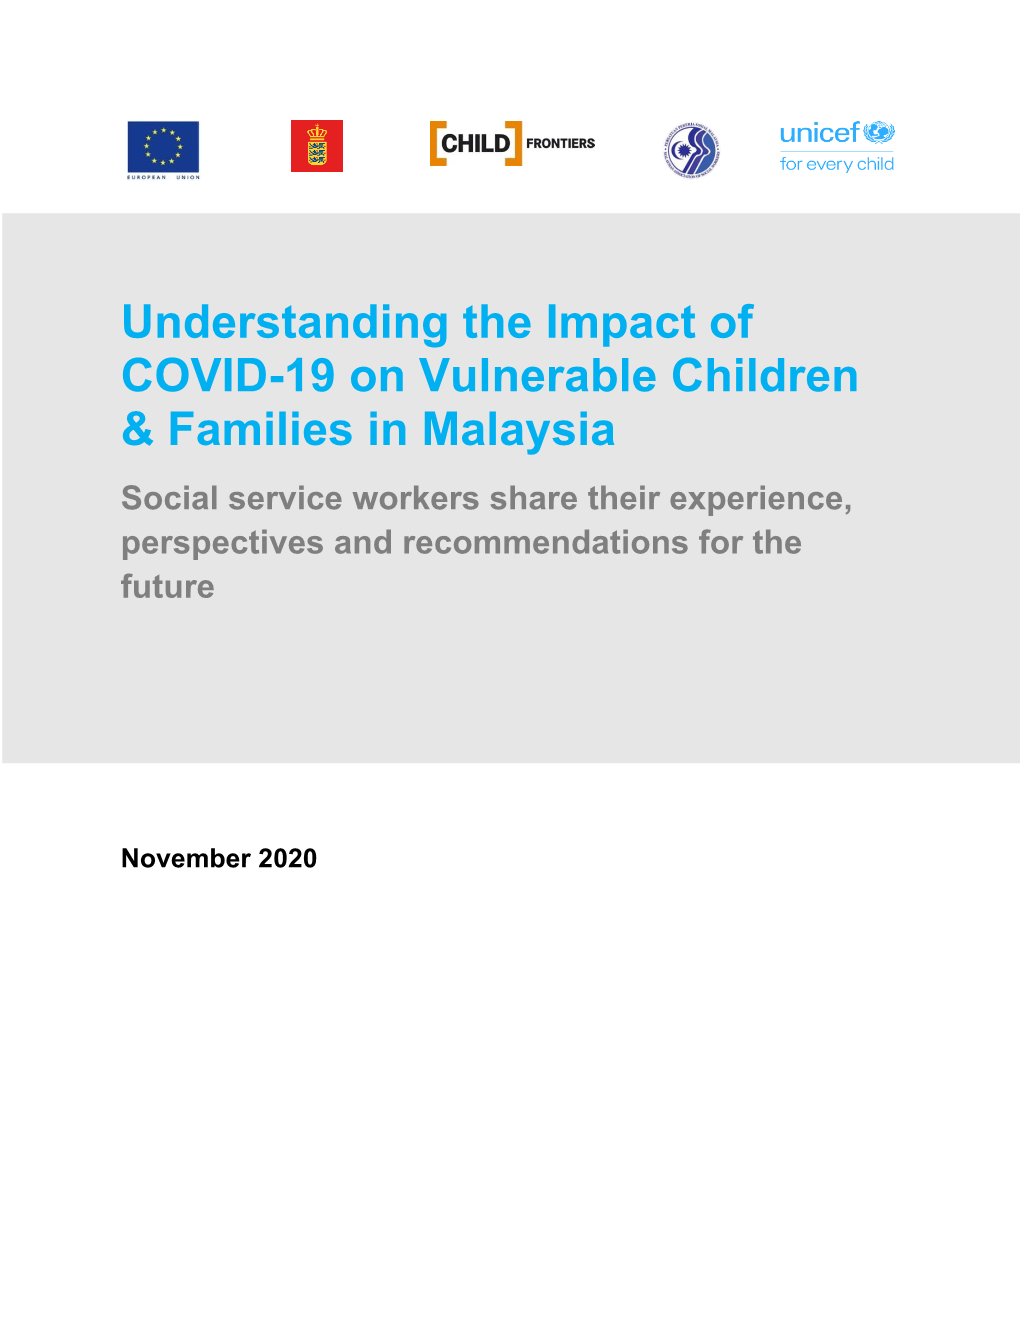 Impact of COVID-19 on Vulnerable Children & Families In